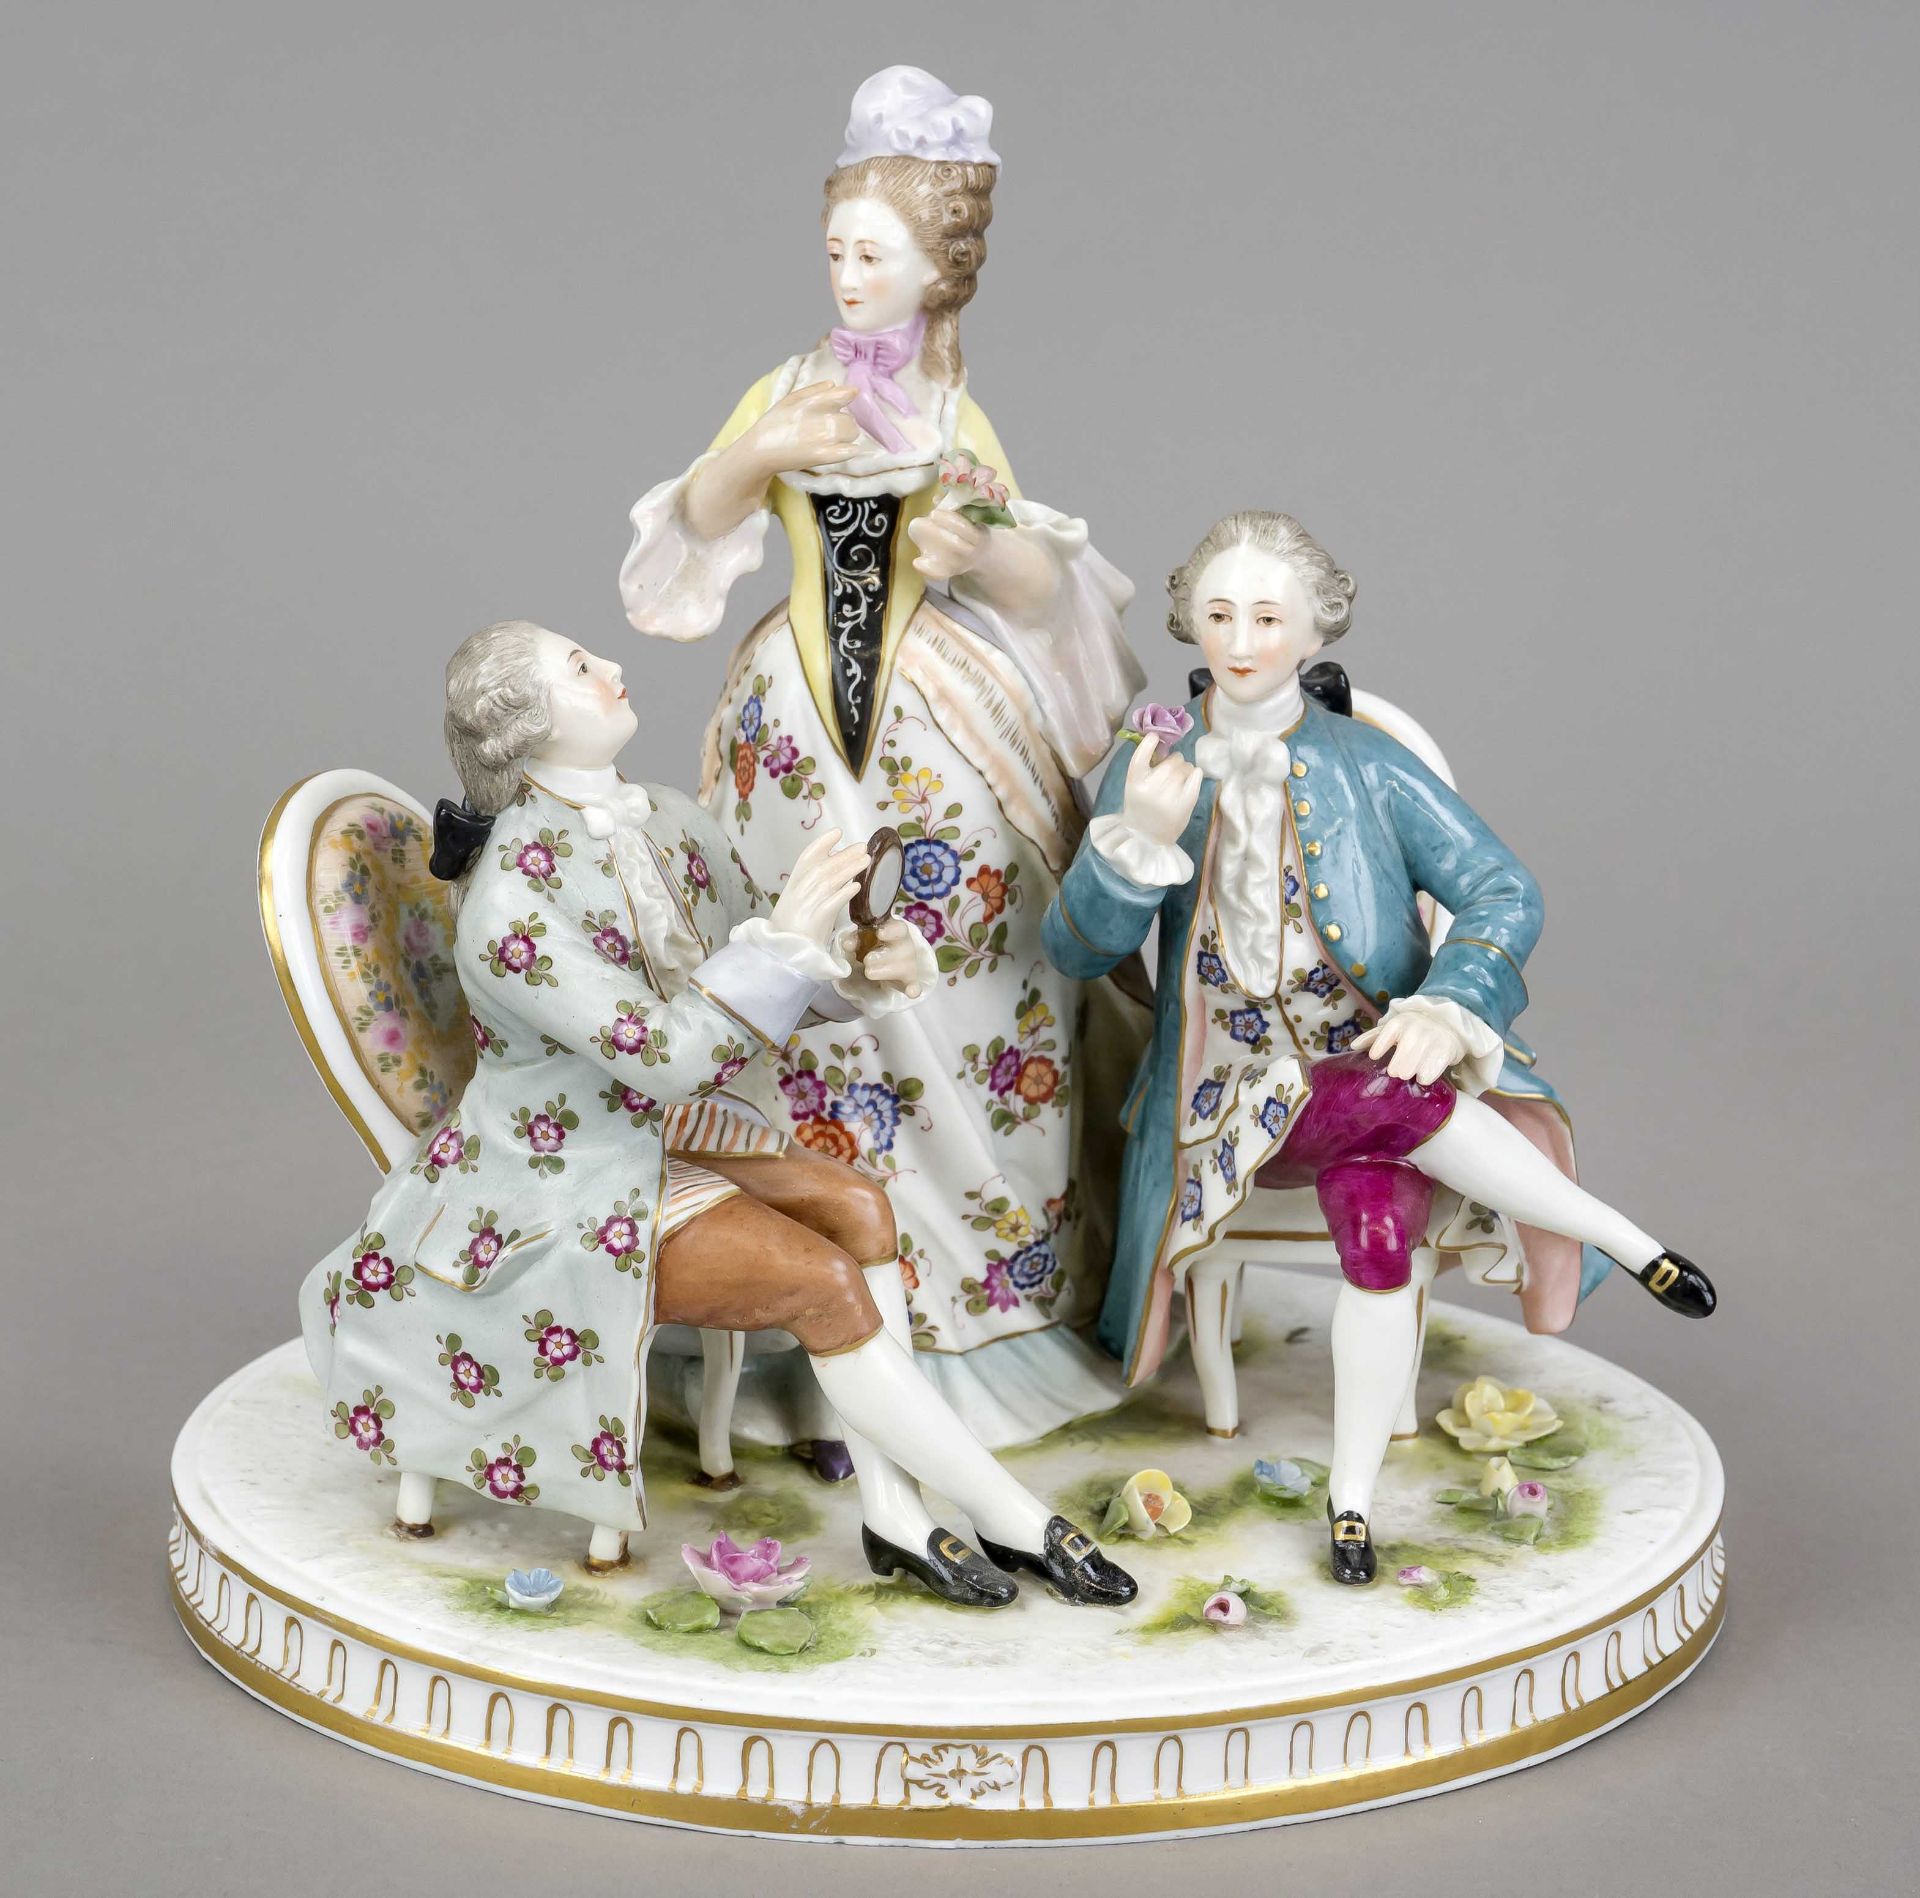 Group of figures, Ludwigsburg, 20th century, Rococo group, elegant lady standing between two